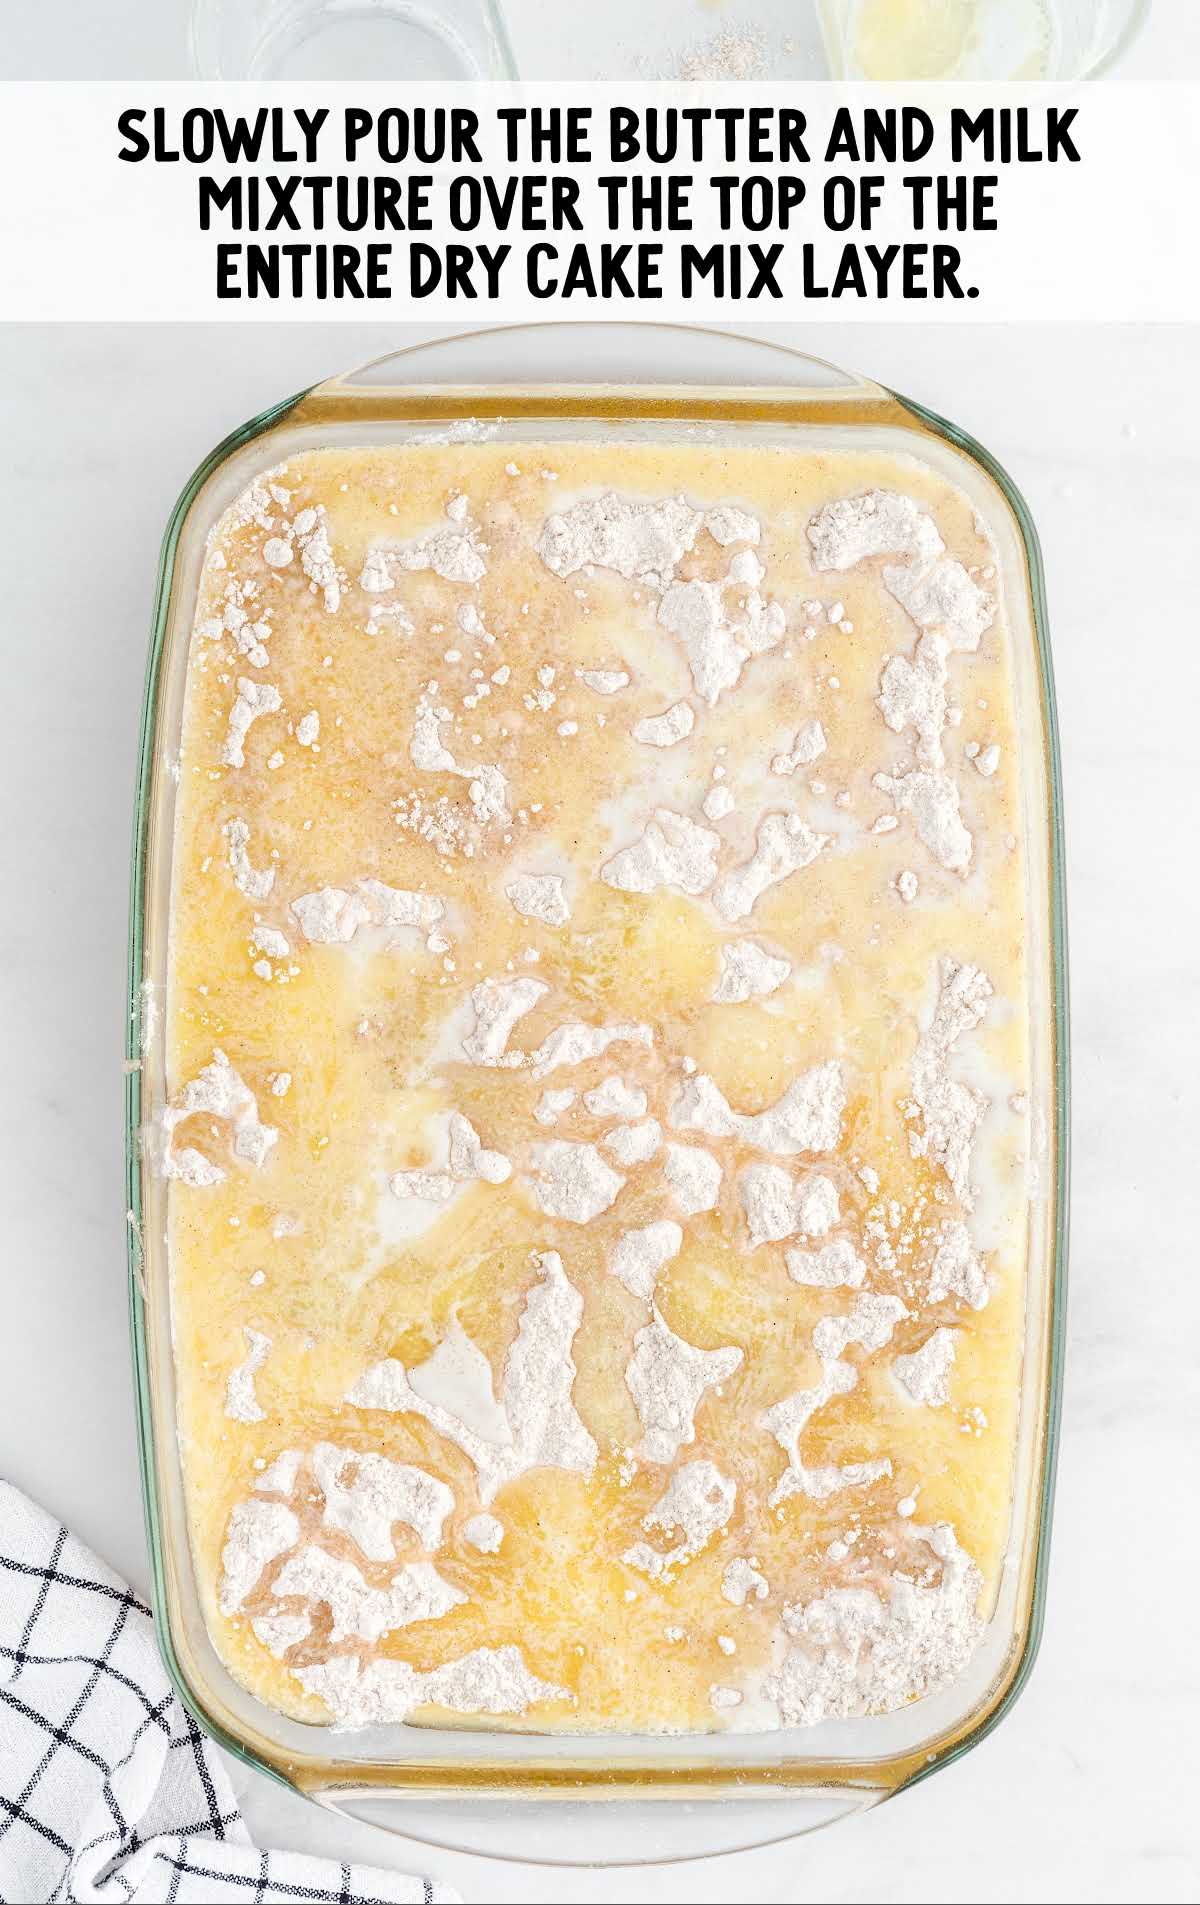 butter and milk mixtures poured on top of the dry cake